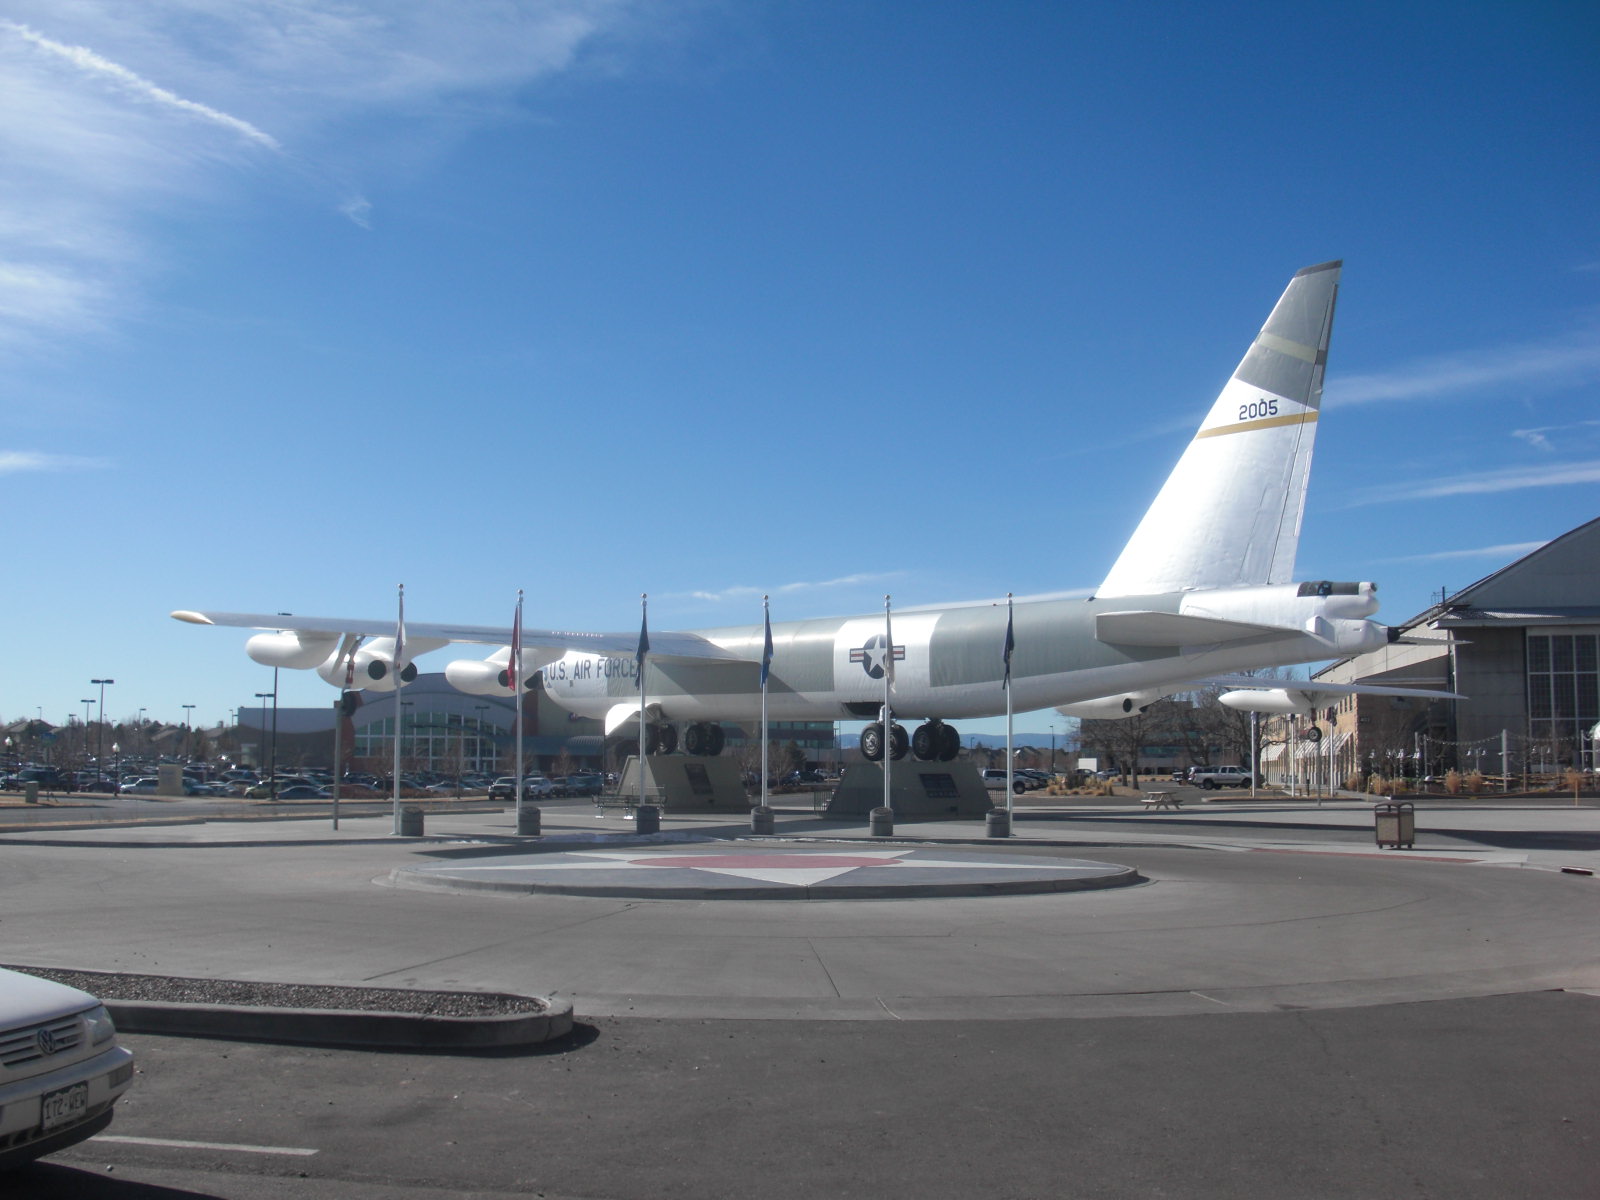 B52 Stratofortress at old Lowery Air Force Base,<br />Denver, Colorado, January 2013